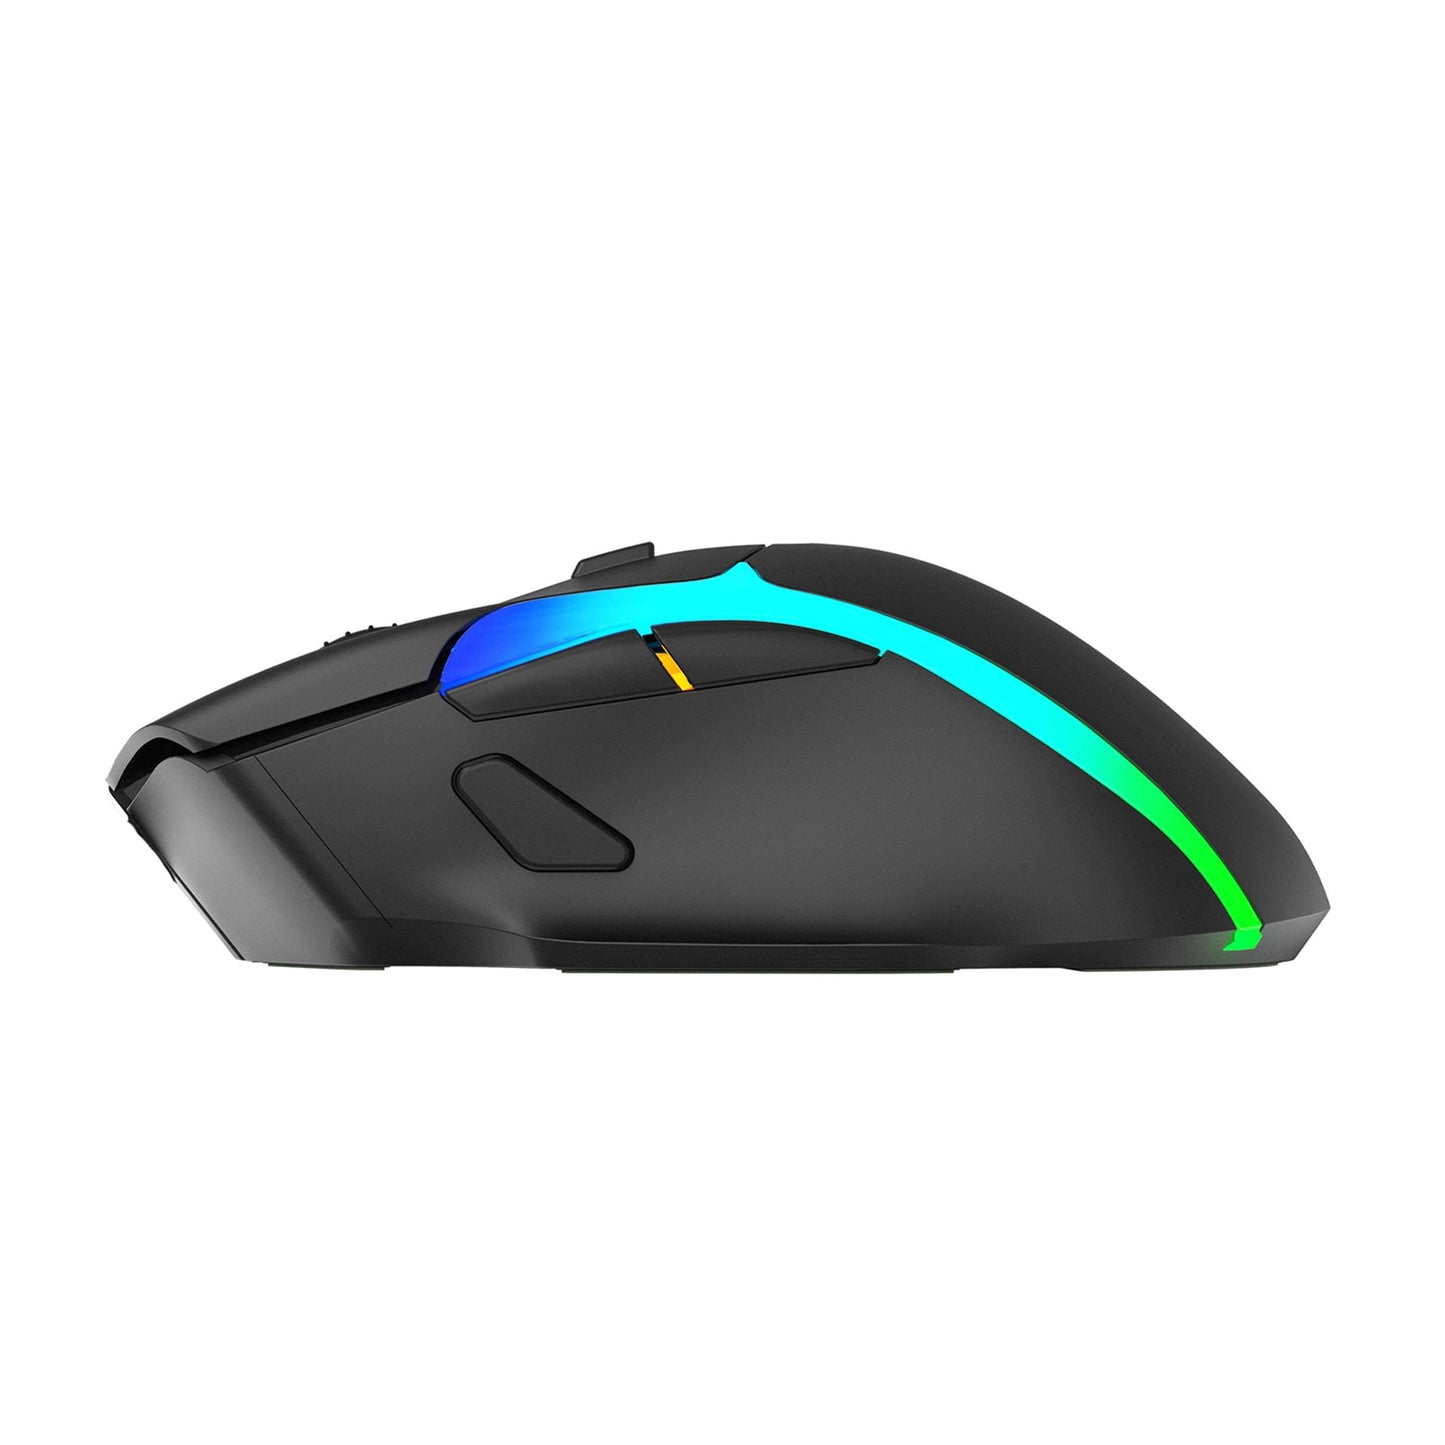 Marvo Scorpion M729W Wireless Gaming Mouse, Rechargeable, RGB with 7 Lighting Modes, 6 adjustable levels up to 4800 dpi, Gaming Grade Optical Sensor with 7 Buttons, Black